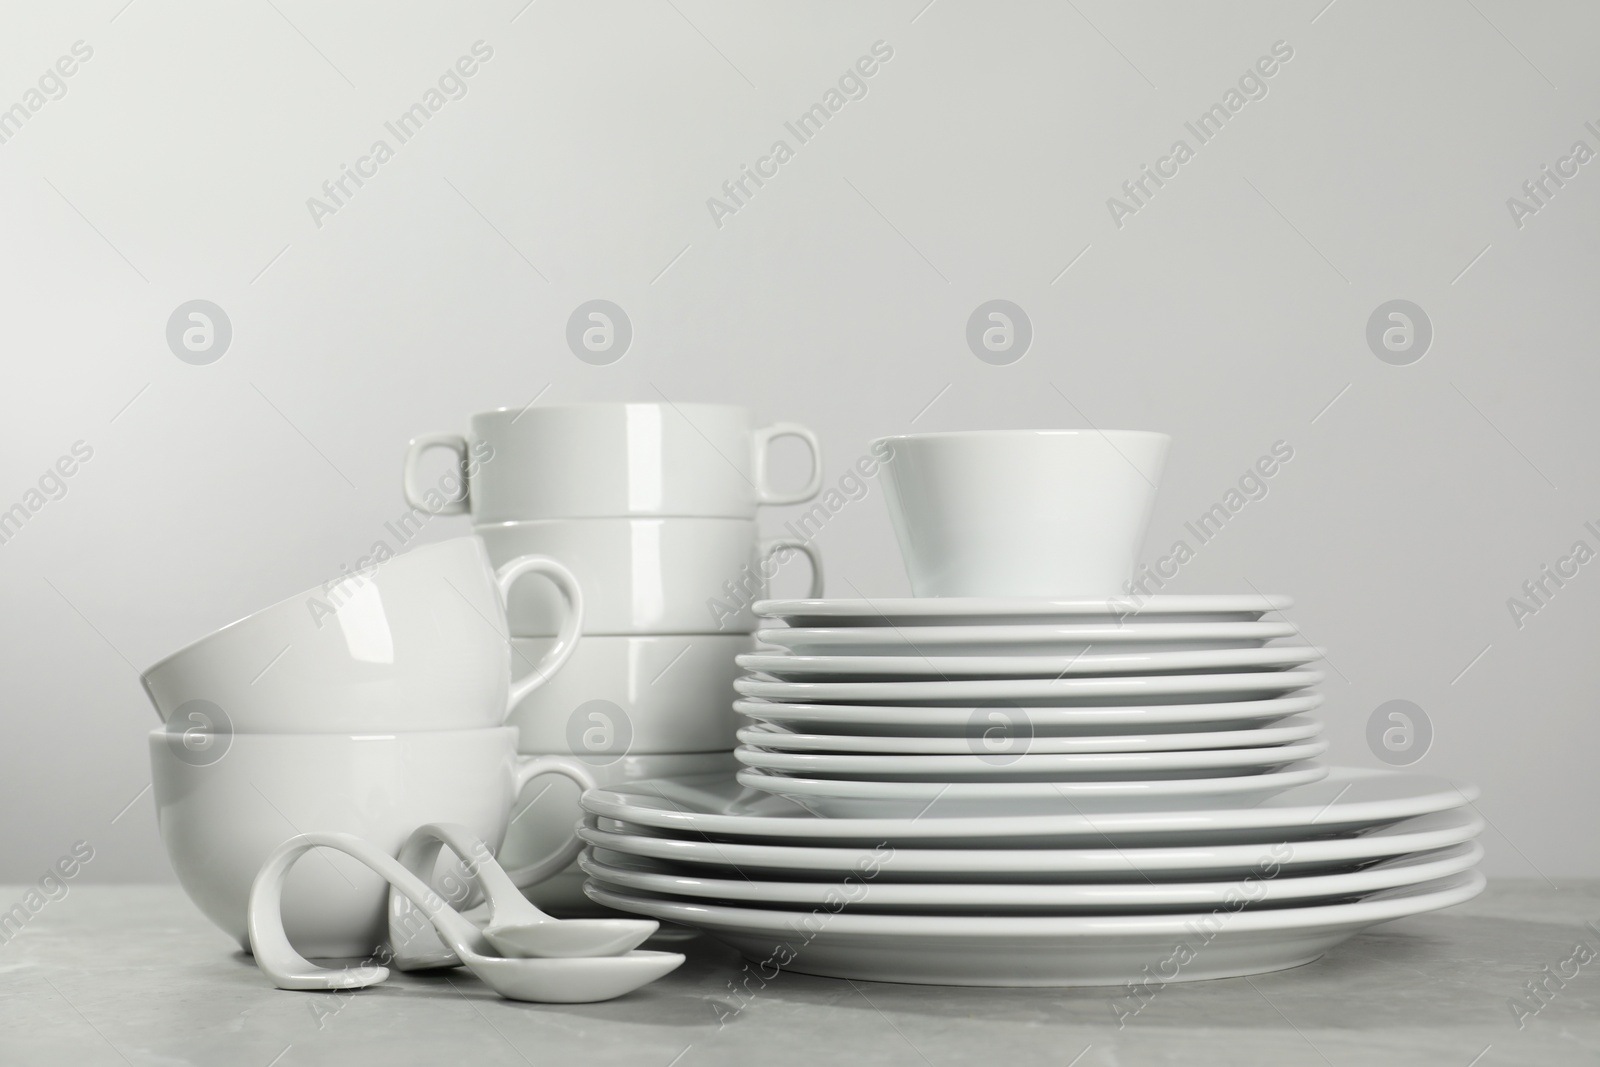 Photo of Set of clean dishware on grey table against light background